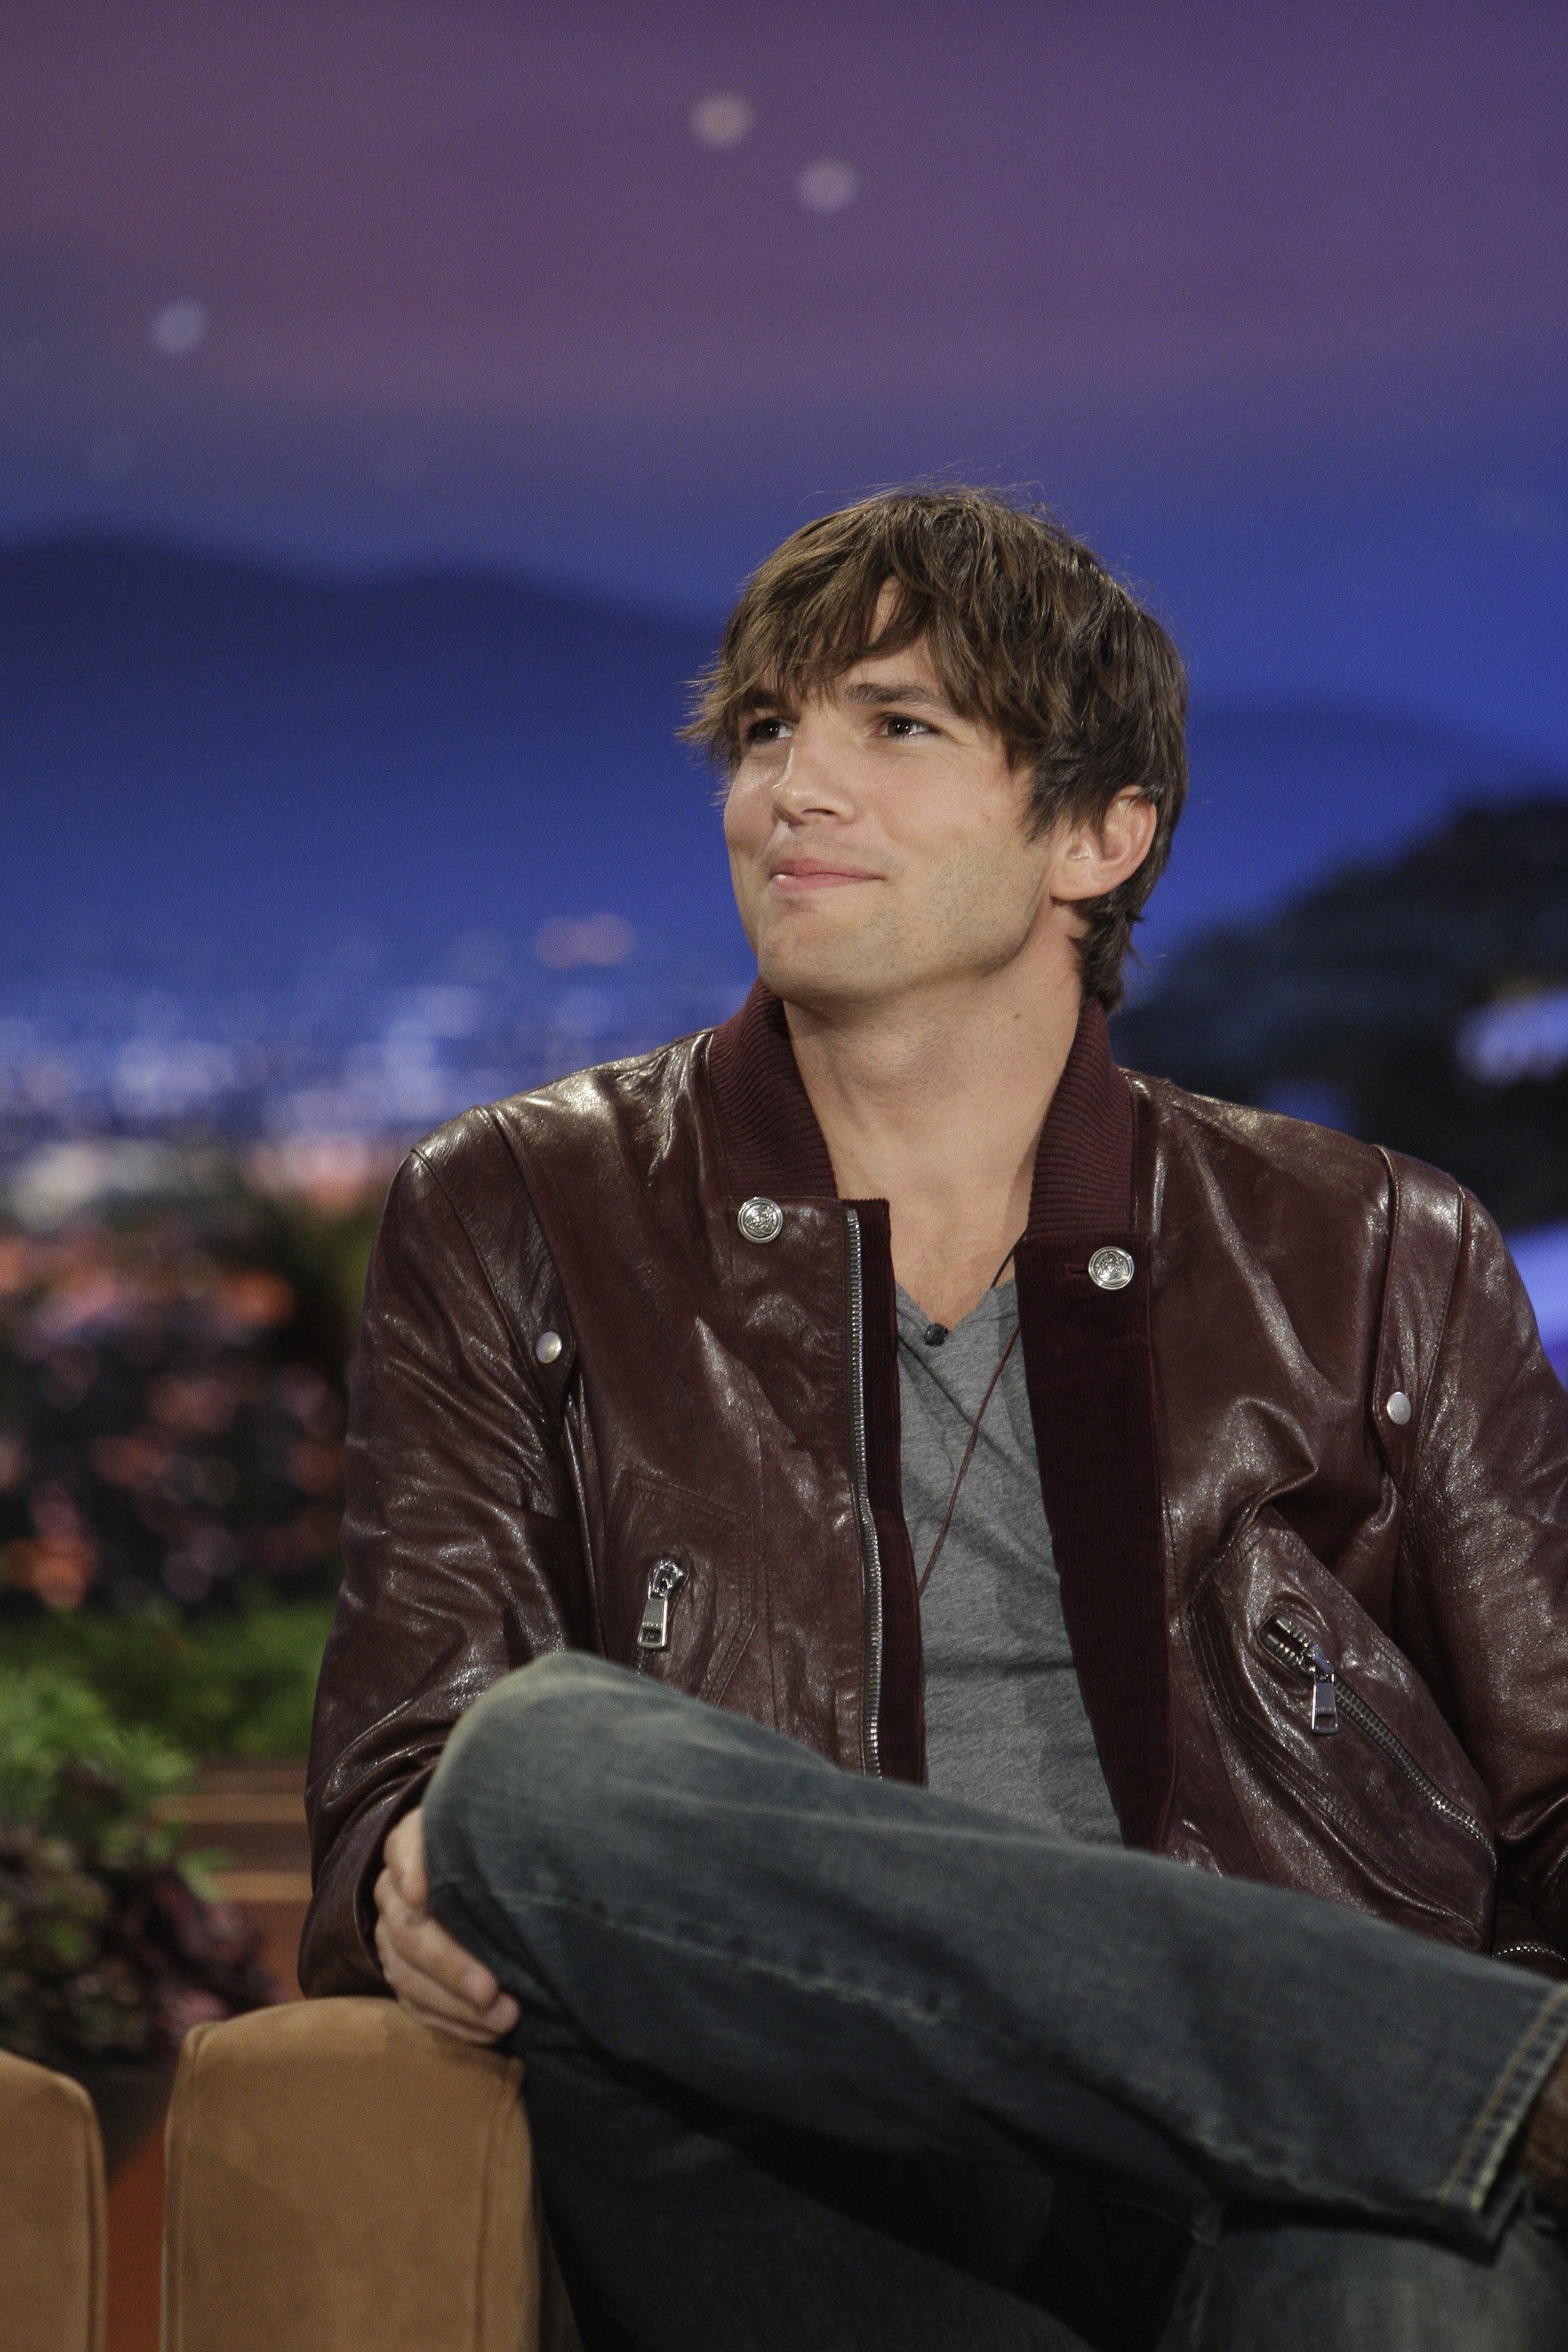 Actor Ashton Kutcher during an interview on August 3, 2009. | Source: Getty Images